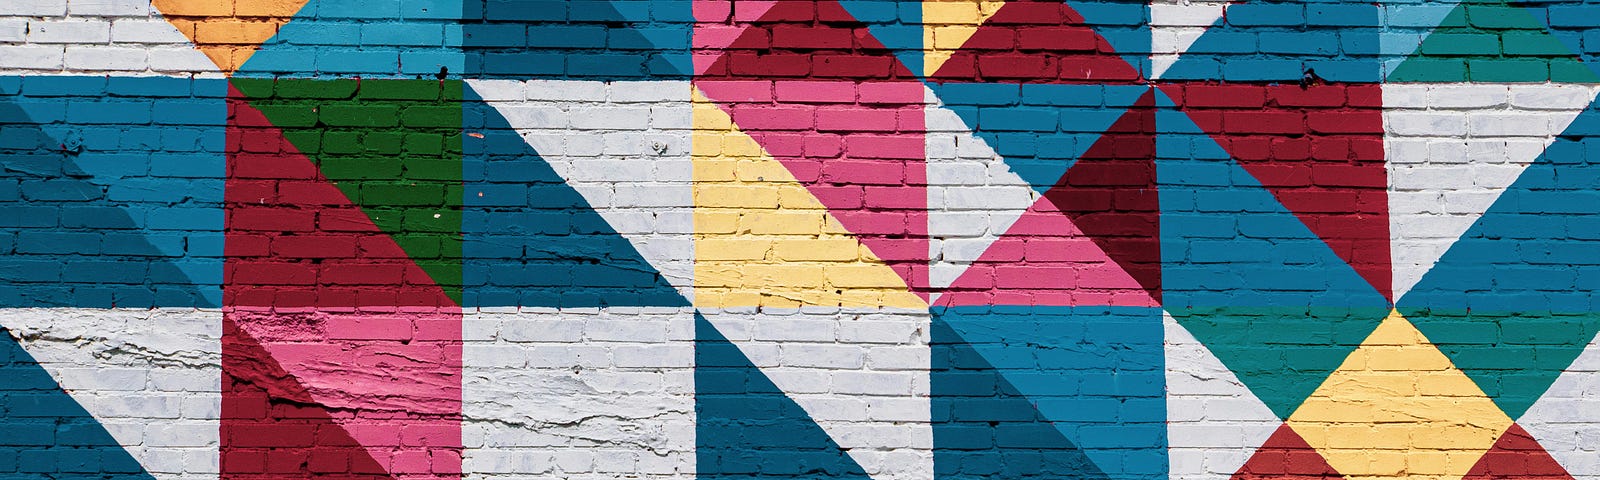 paint on a brick wall in a quilt pattern of blues, pinks, greens, yellows, whites and black